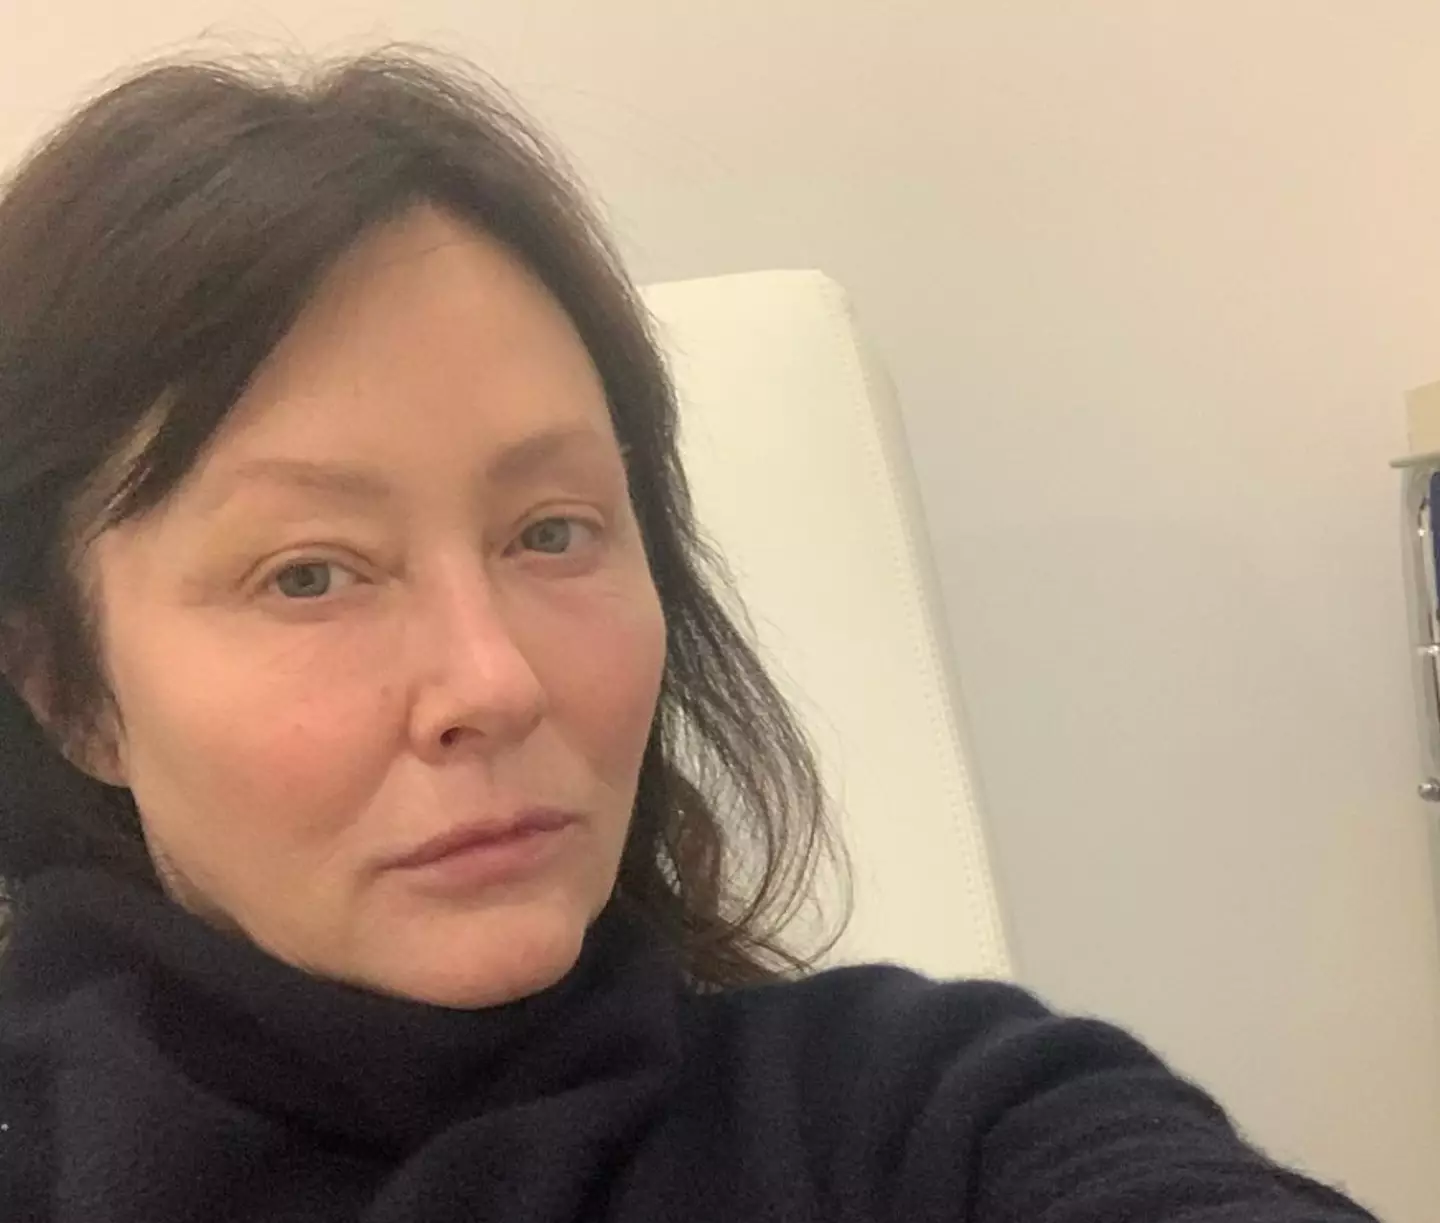 Shannen Doherty is optimistic about her life after undergoing treatment.